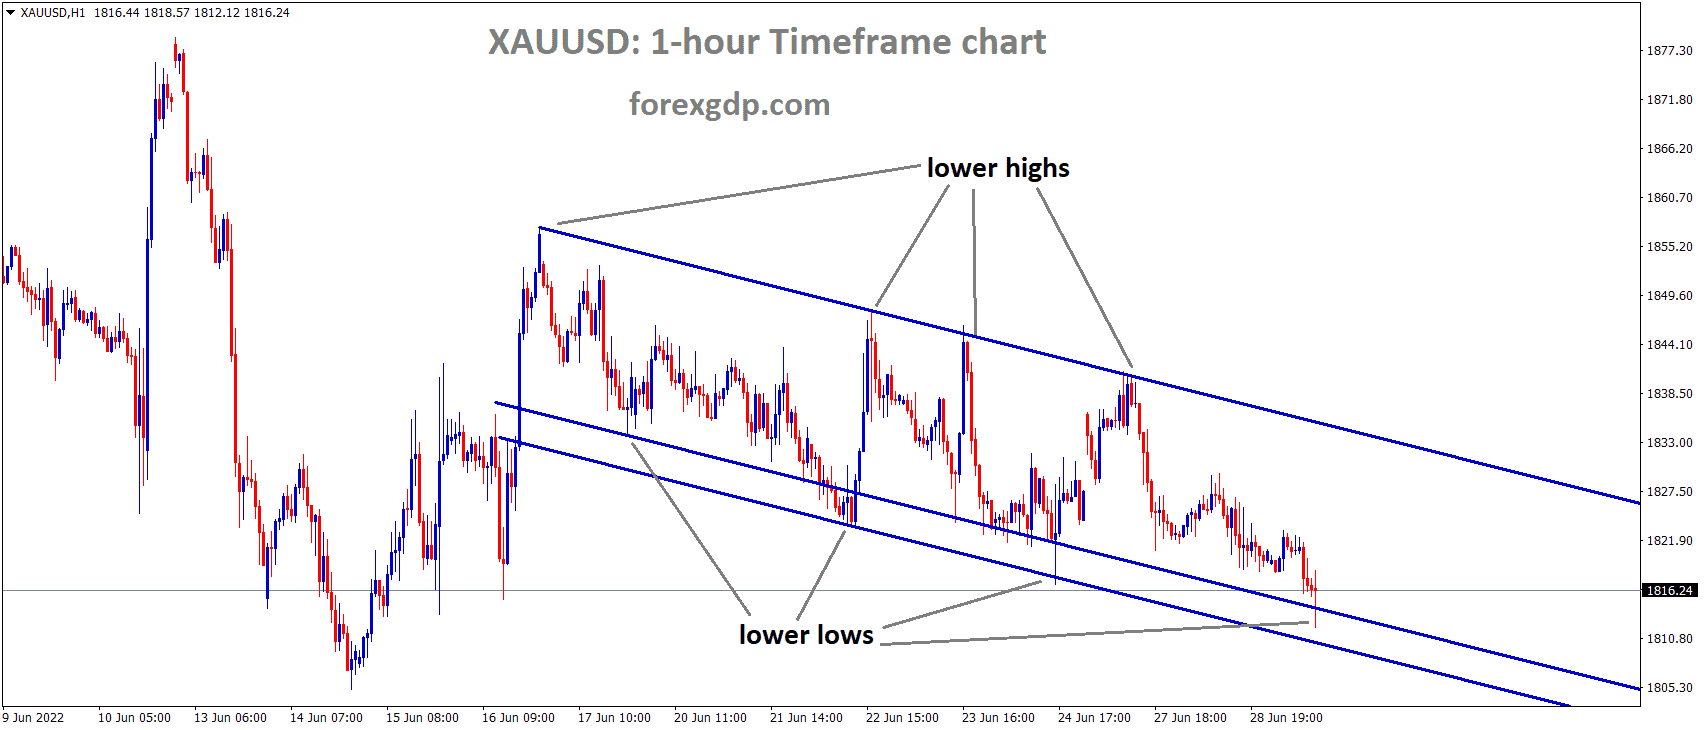 XAUUSD Gold price is moving in the Descending channel and the Market has rebounded from the Lower low area of the channel.